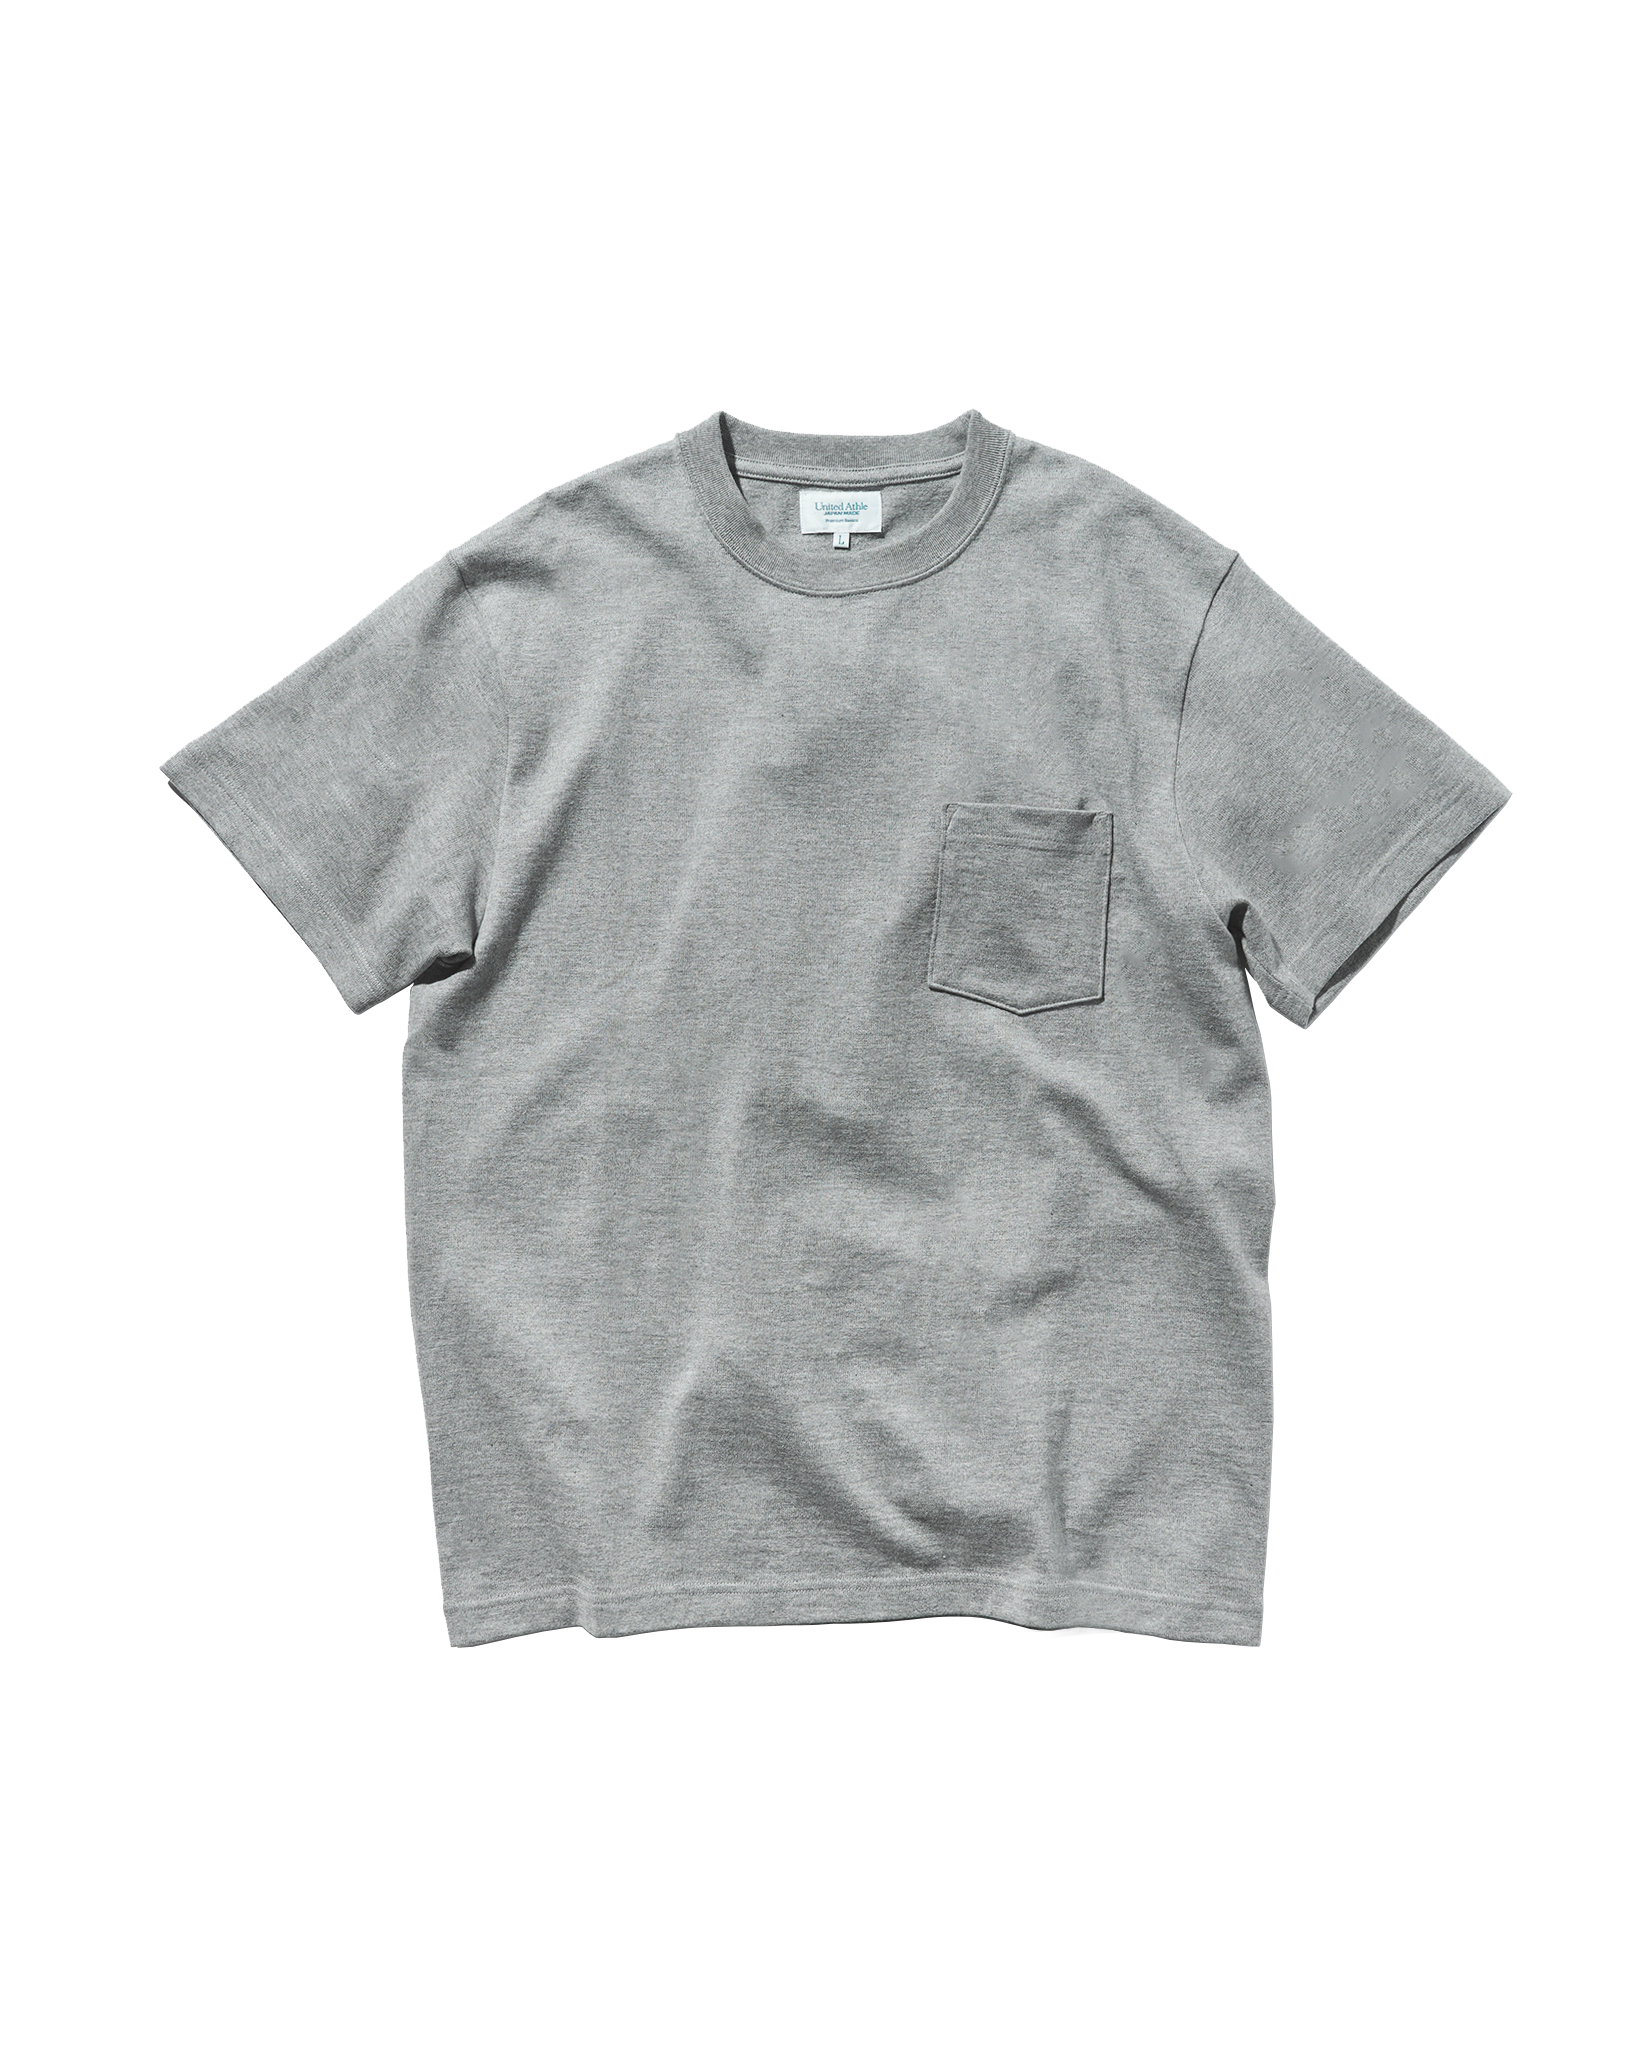 80002 - Japan Made - Standard Fit T-shirt (with pocket) - Grey x 1